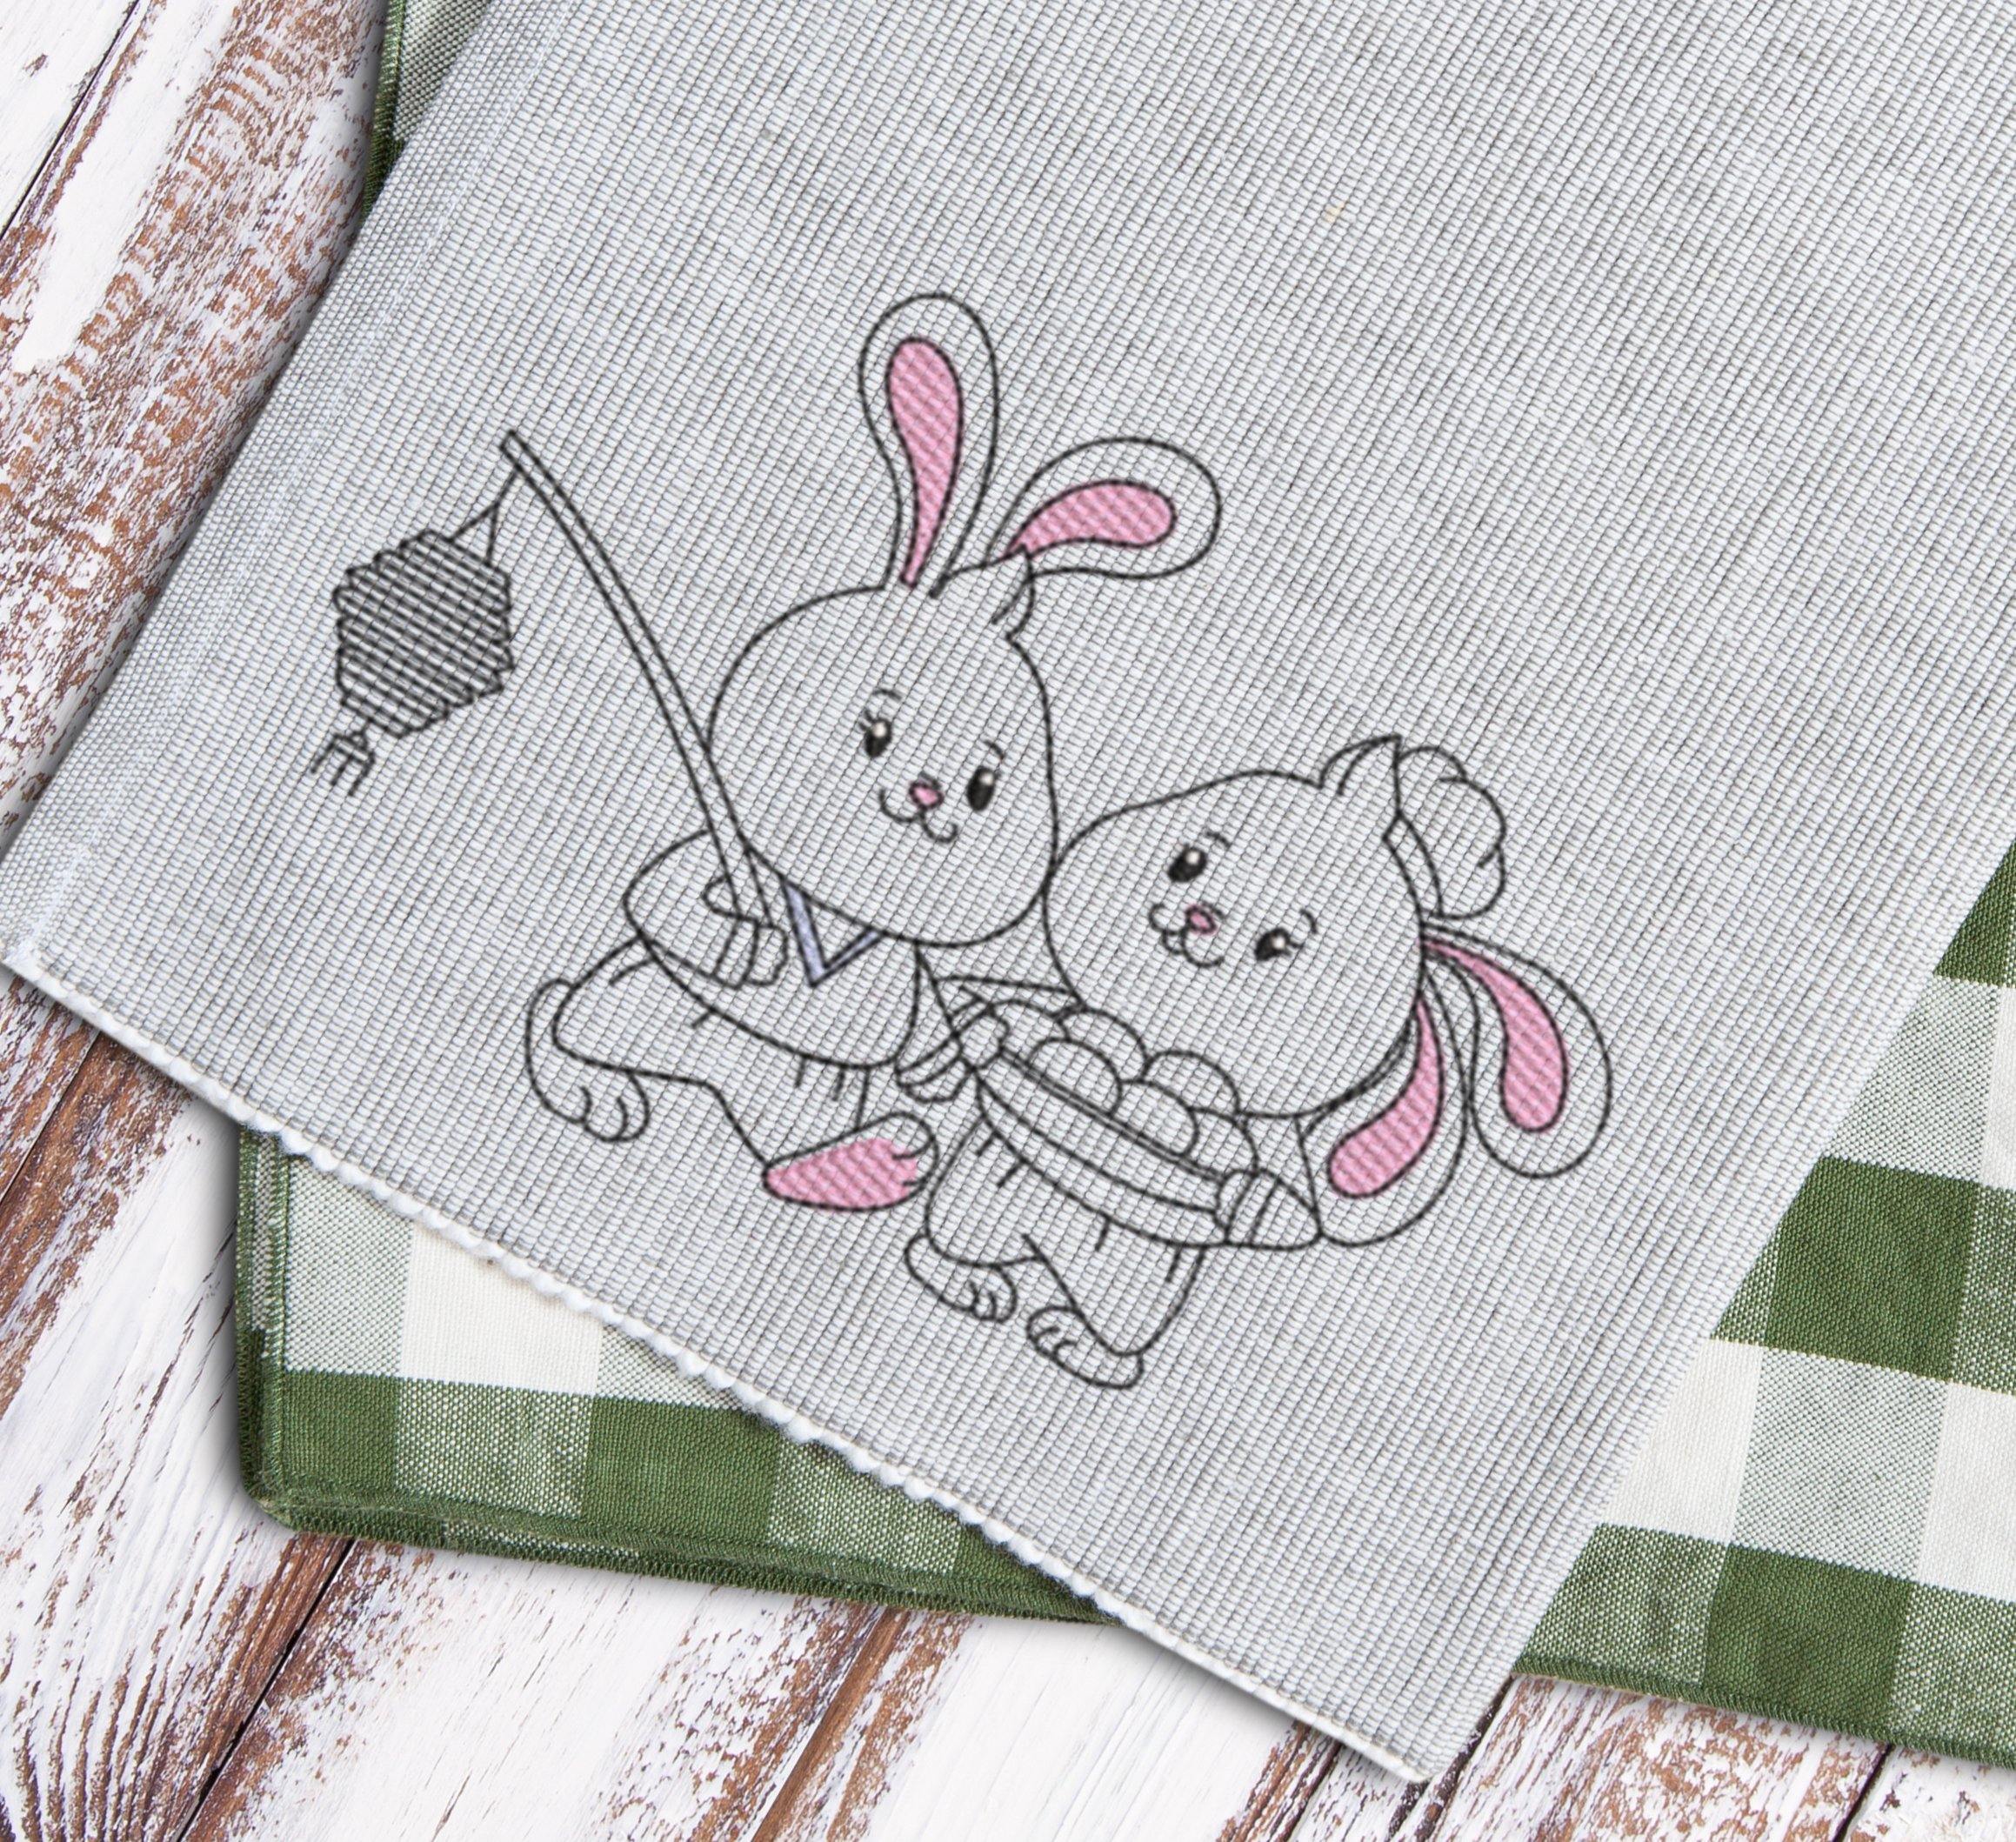 Cute Bunny Couple 2021 Embroidery Design - Oh My Crafty Supplies Inc.